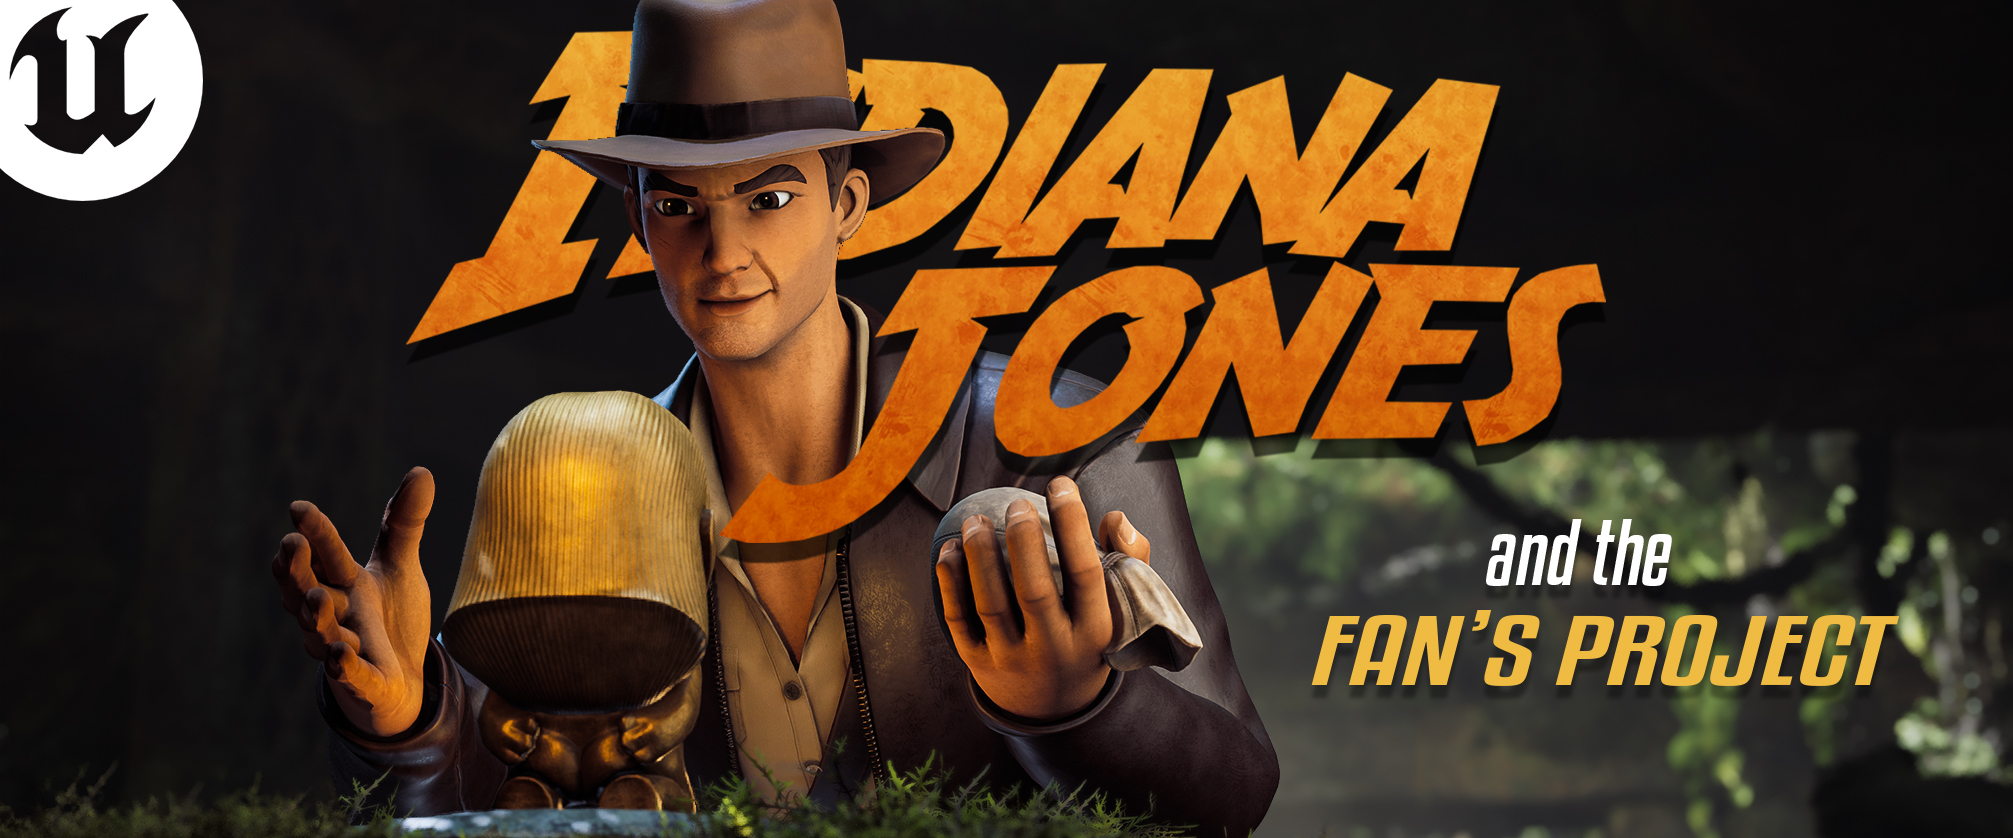 Indiana Jones and the Fan's Project